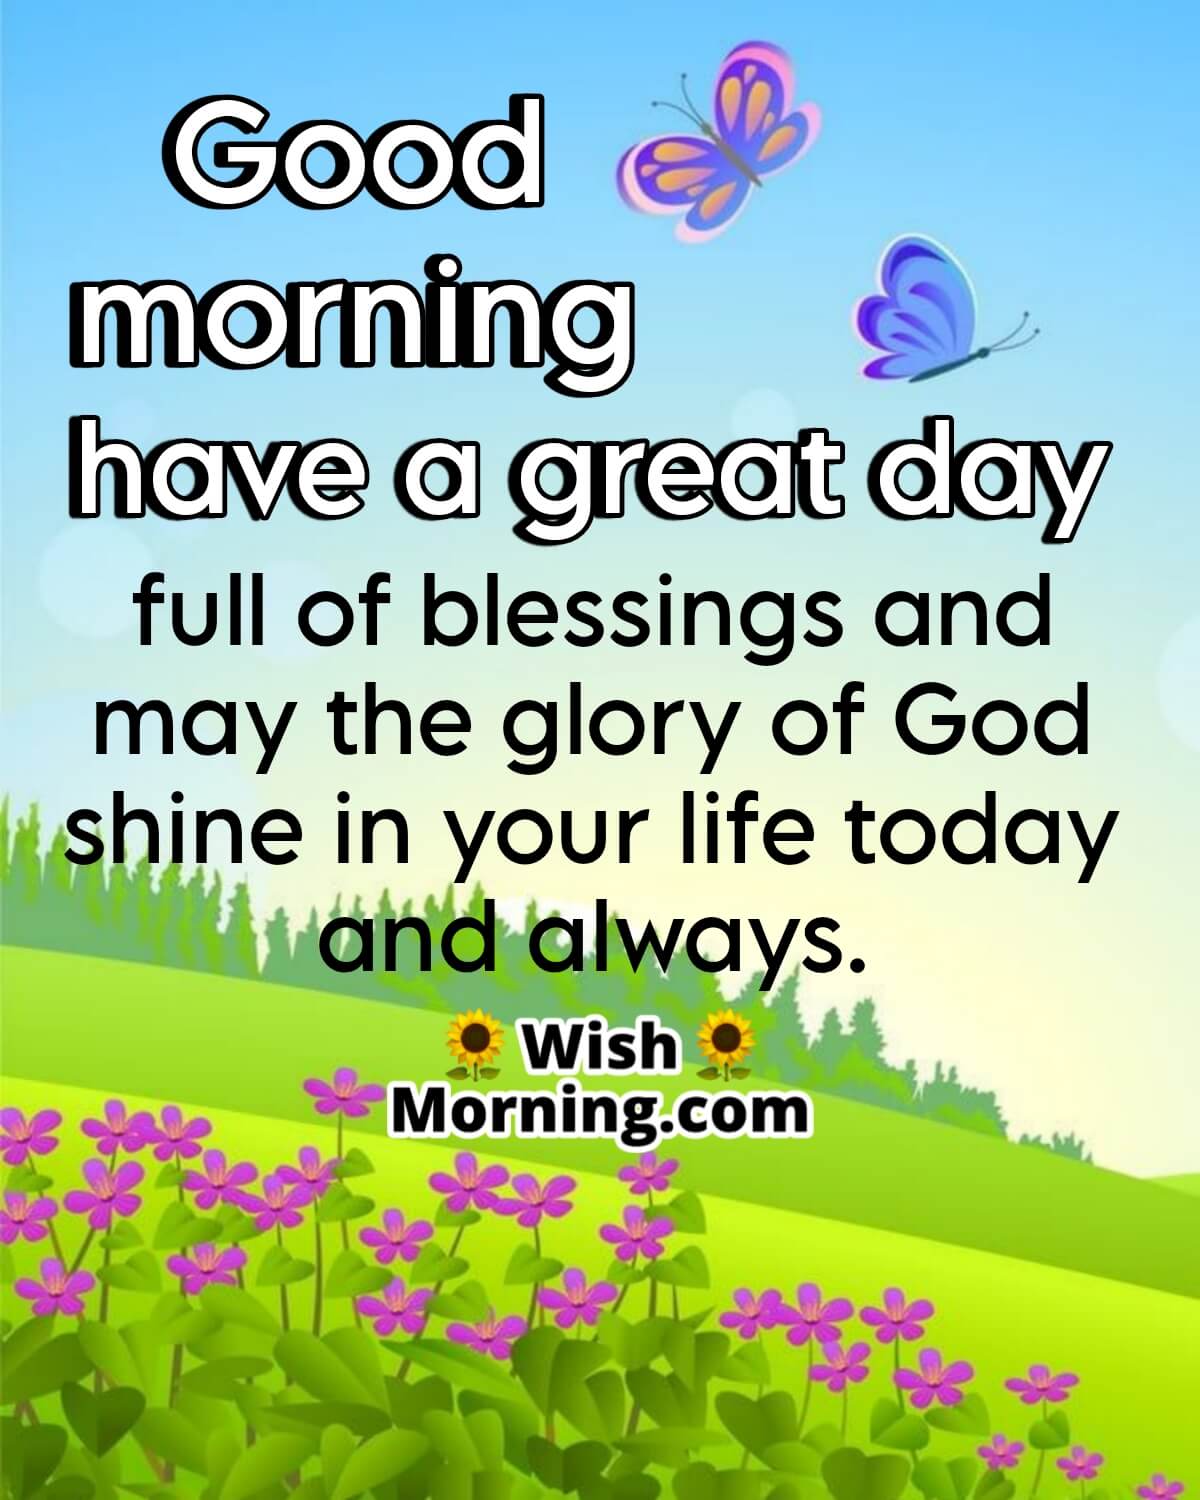 Great Day Wishes - Wish Morning